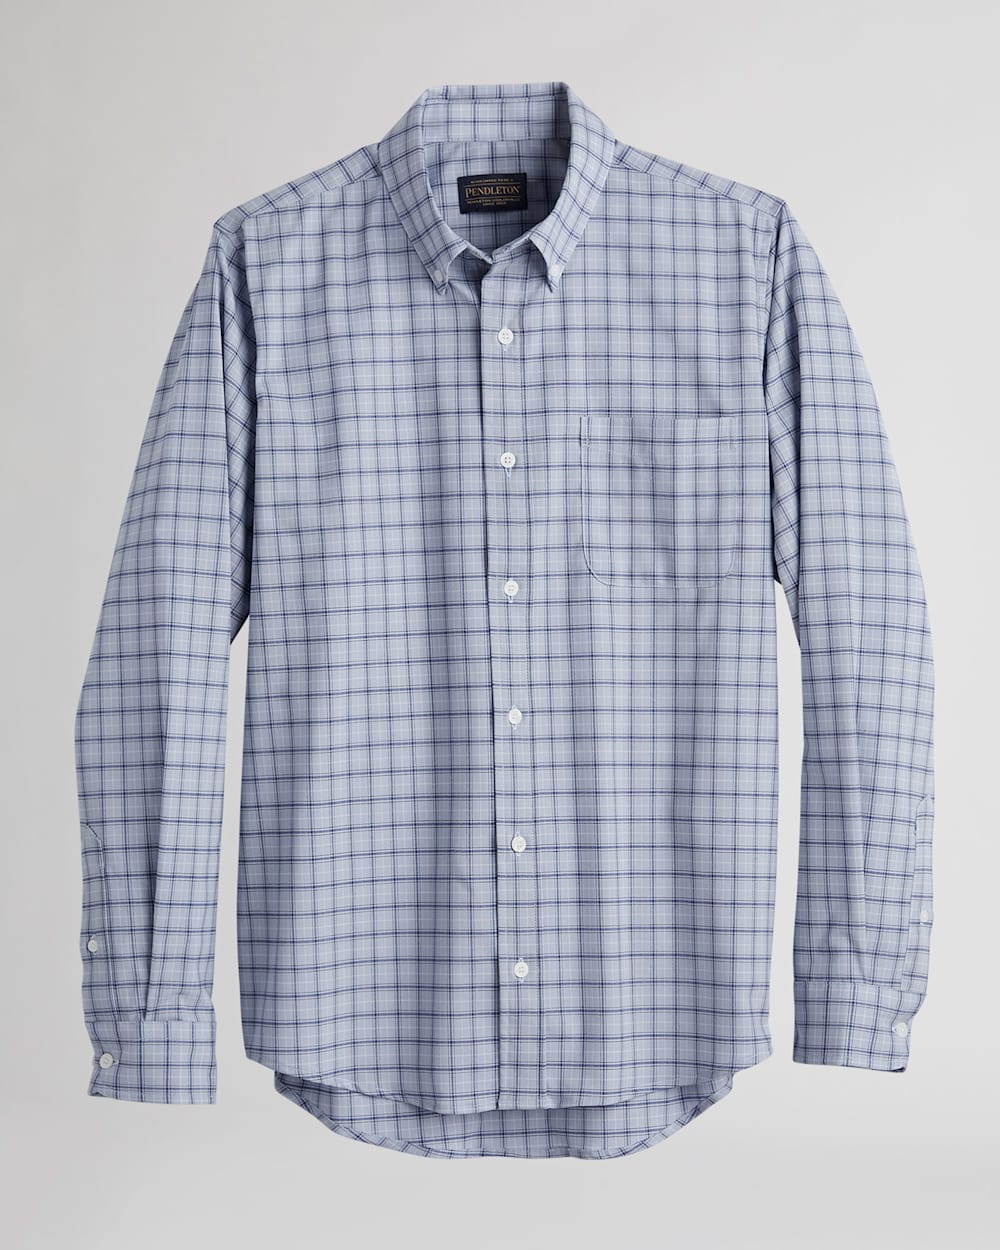 MEN'S EVERGREEN STRETCH MERINO SHIRT IN BLUE/NAVY PLAID image number 1